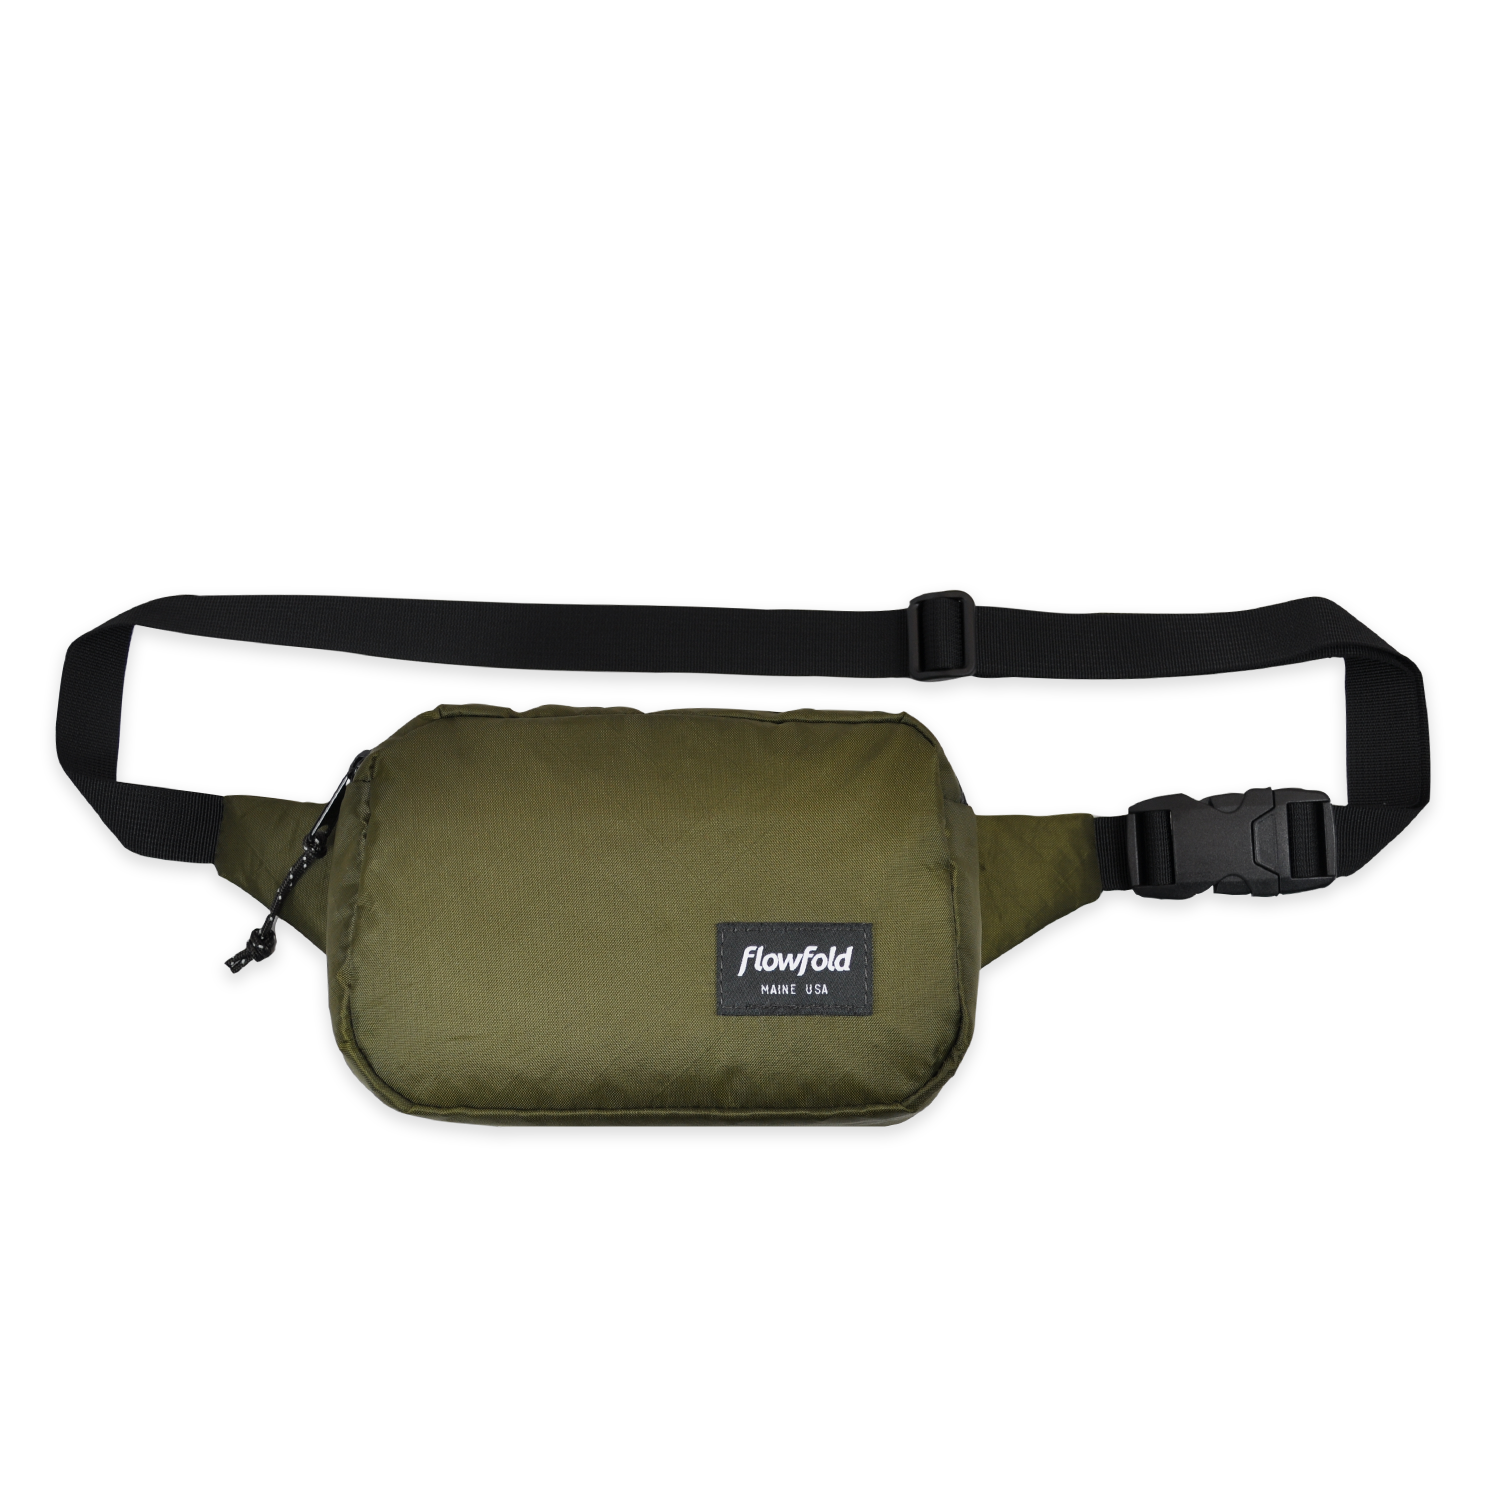 Flowfold Explorer Fanny Pack - Recycled Olive